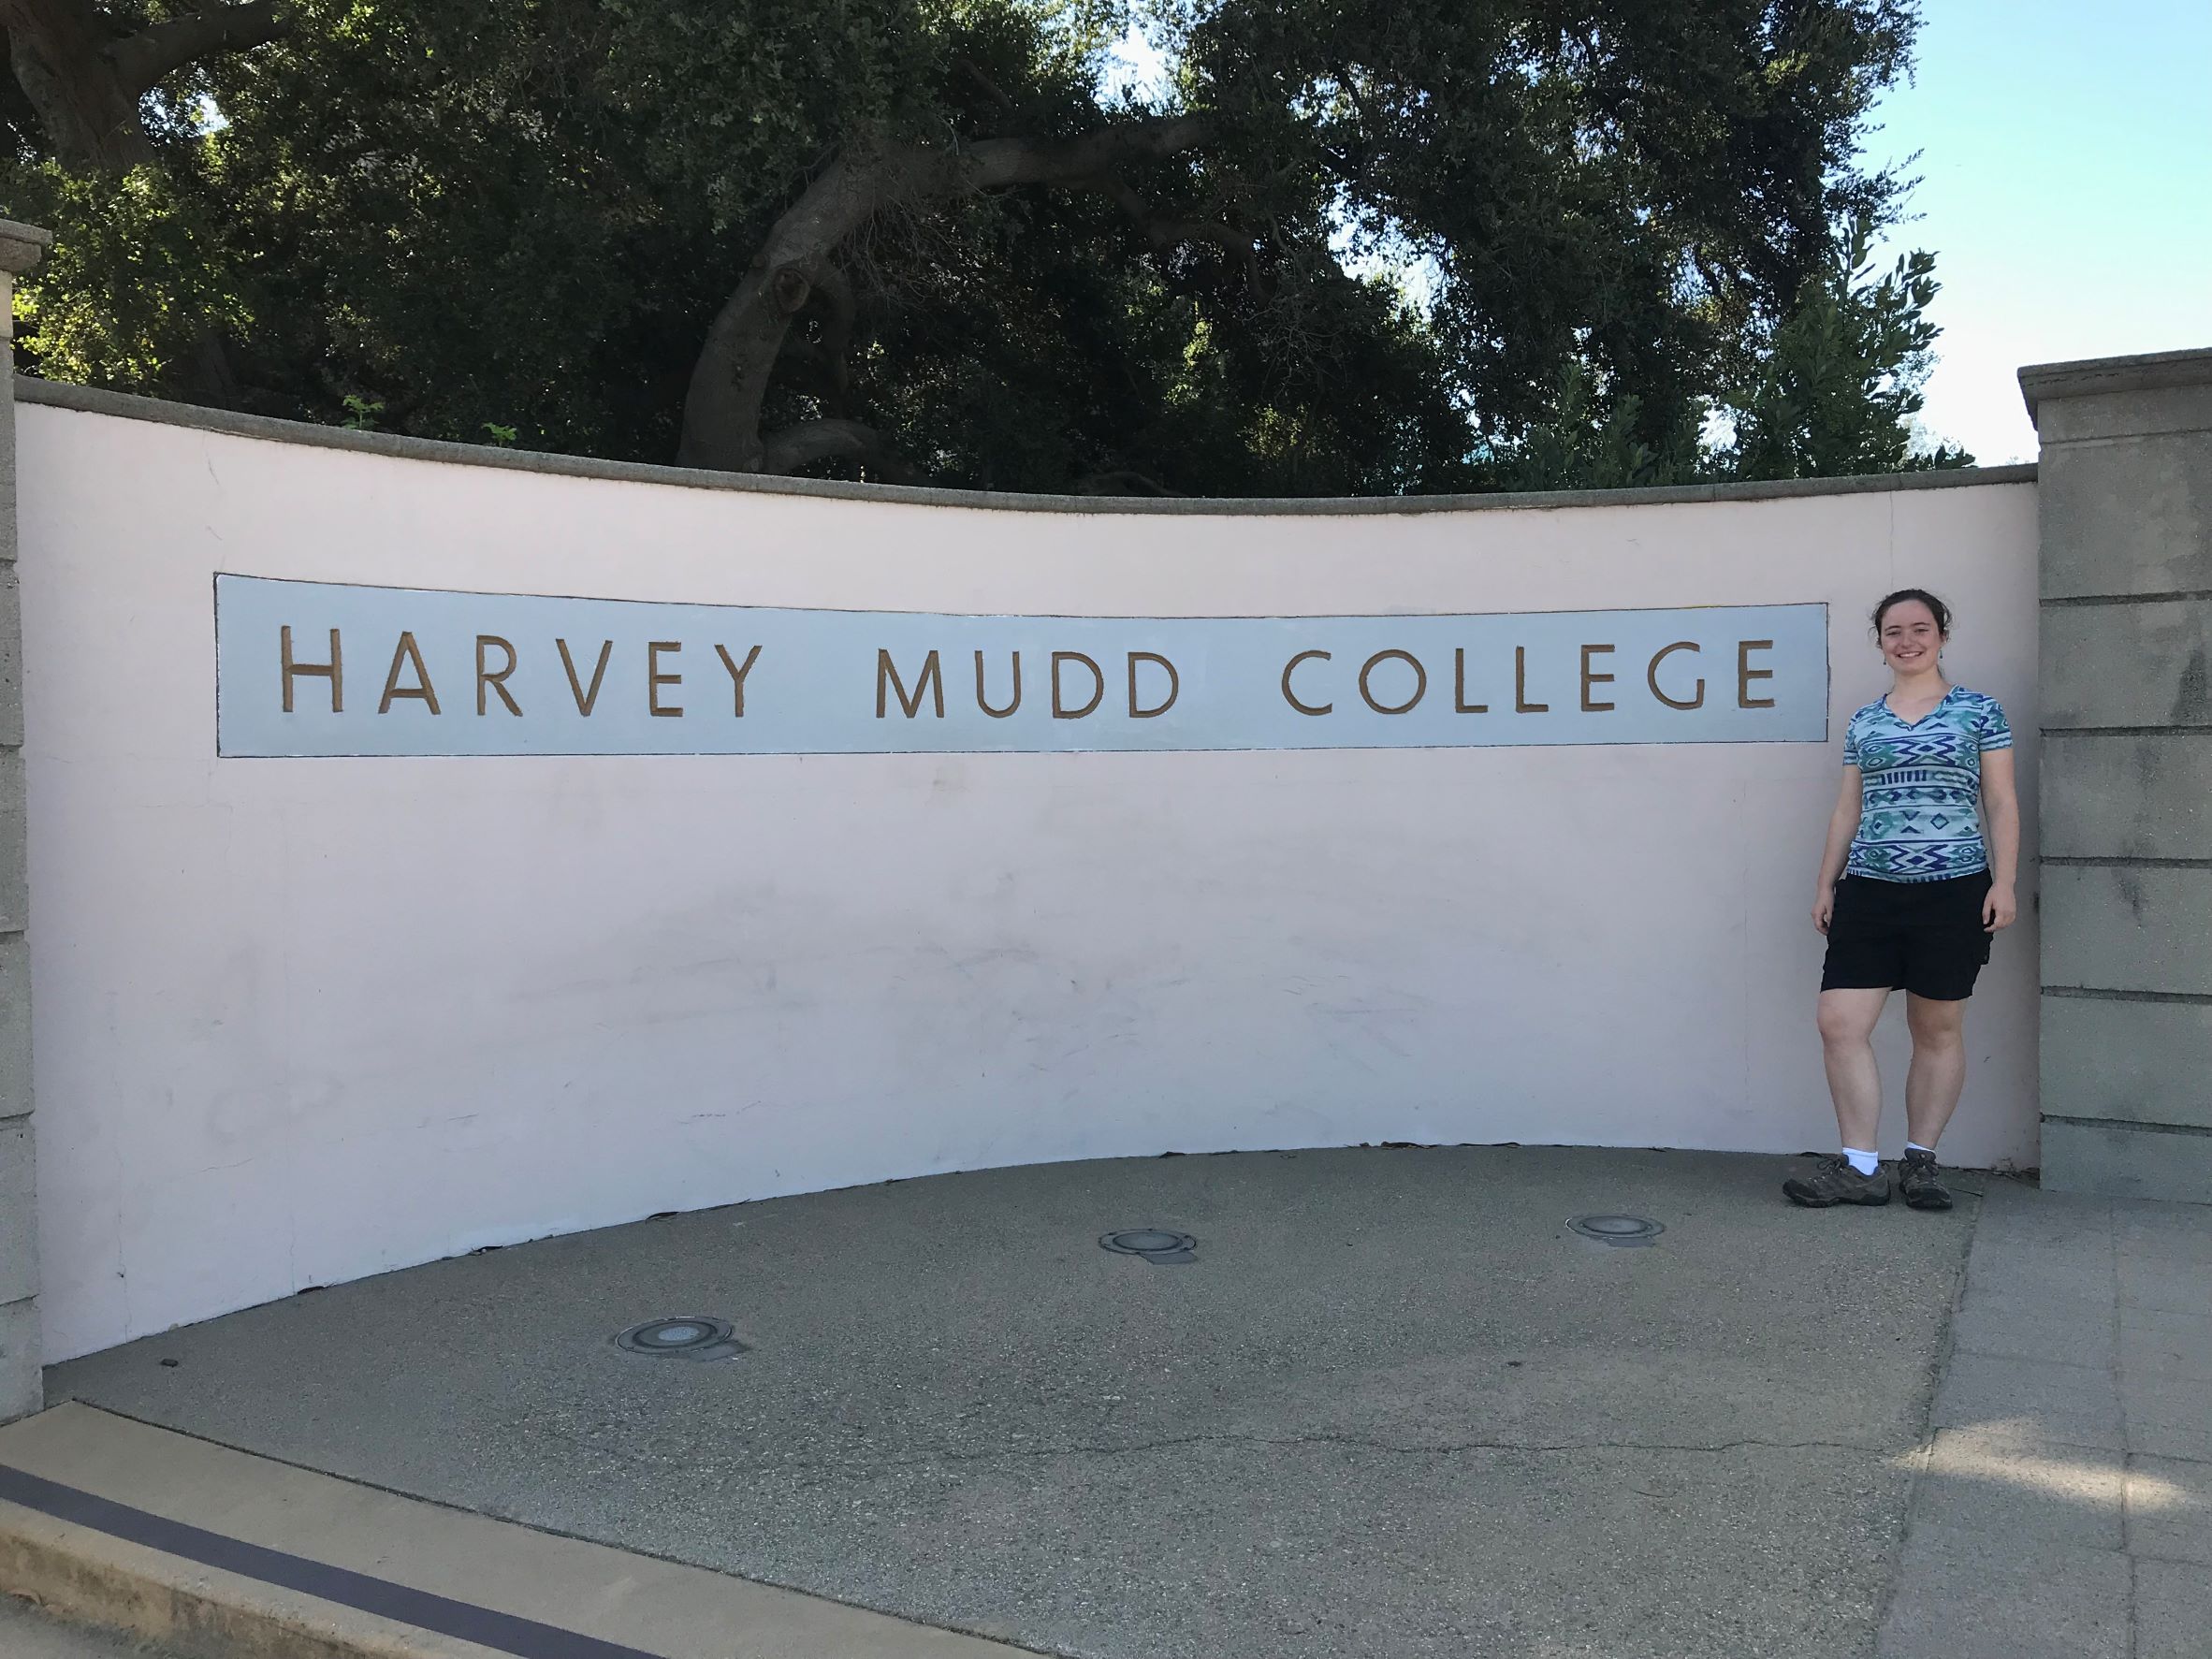 Malia standing by a large sign reading "Harvey Mudd College"